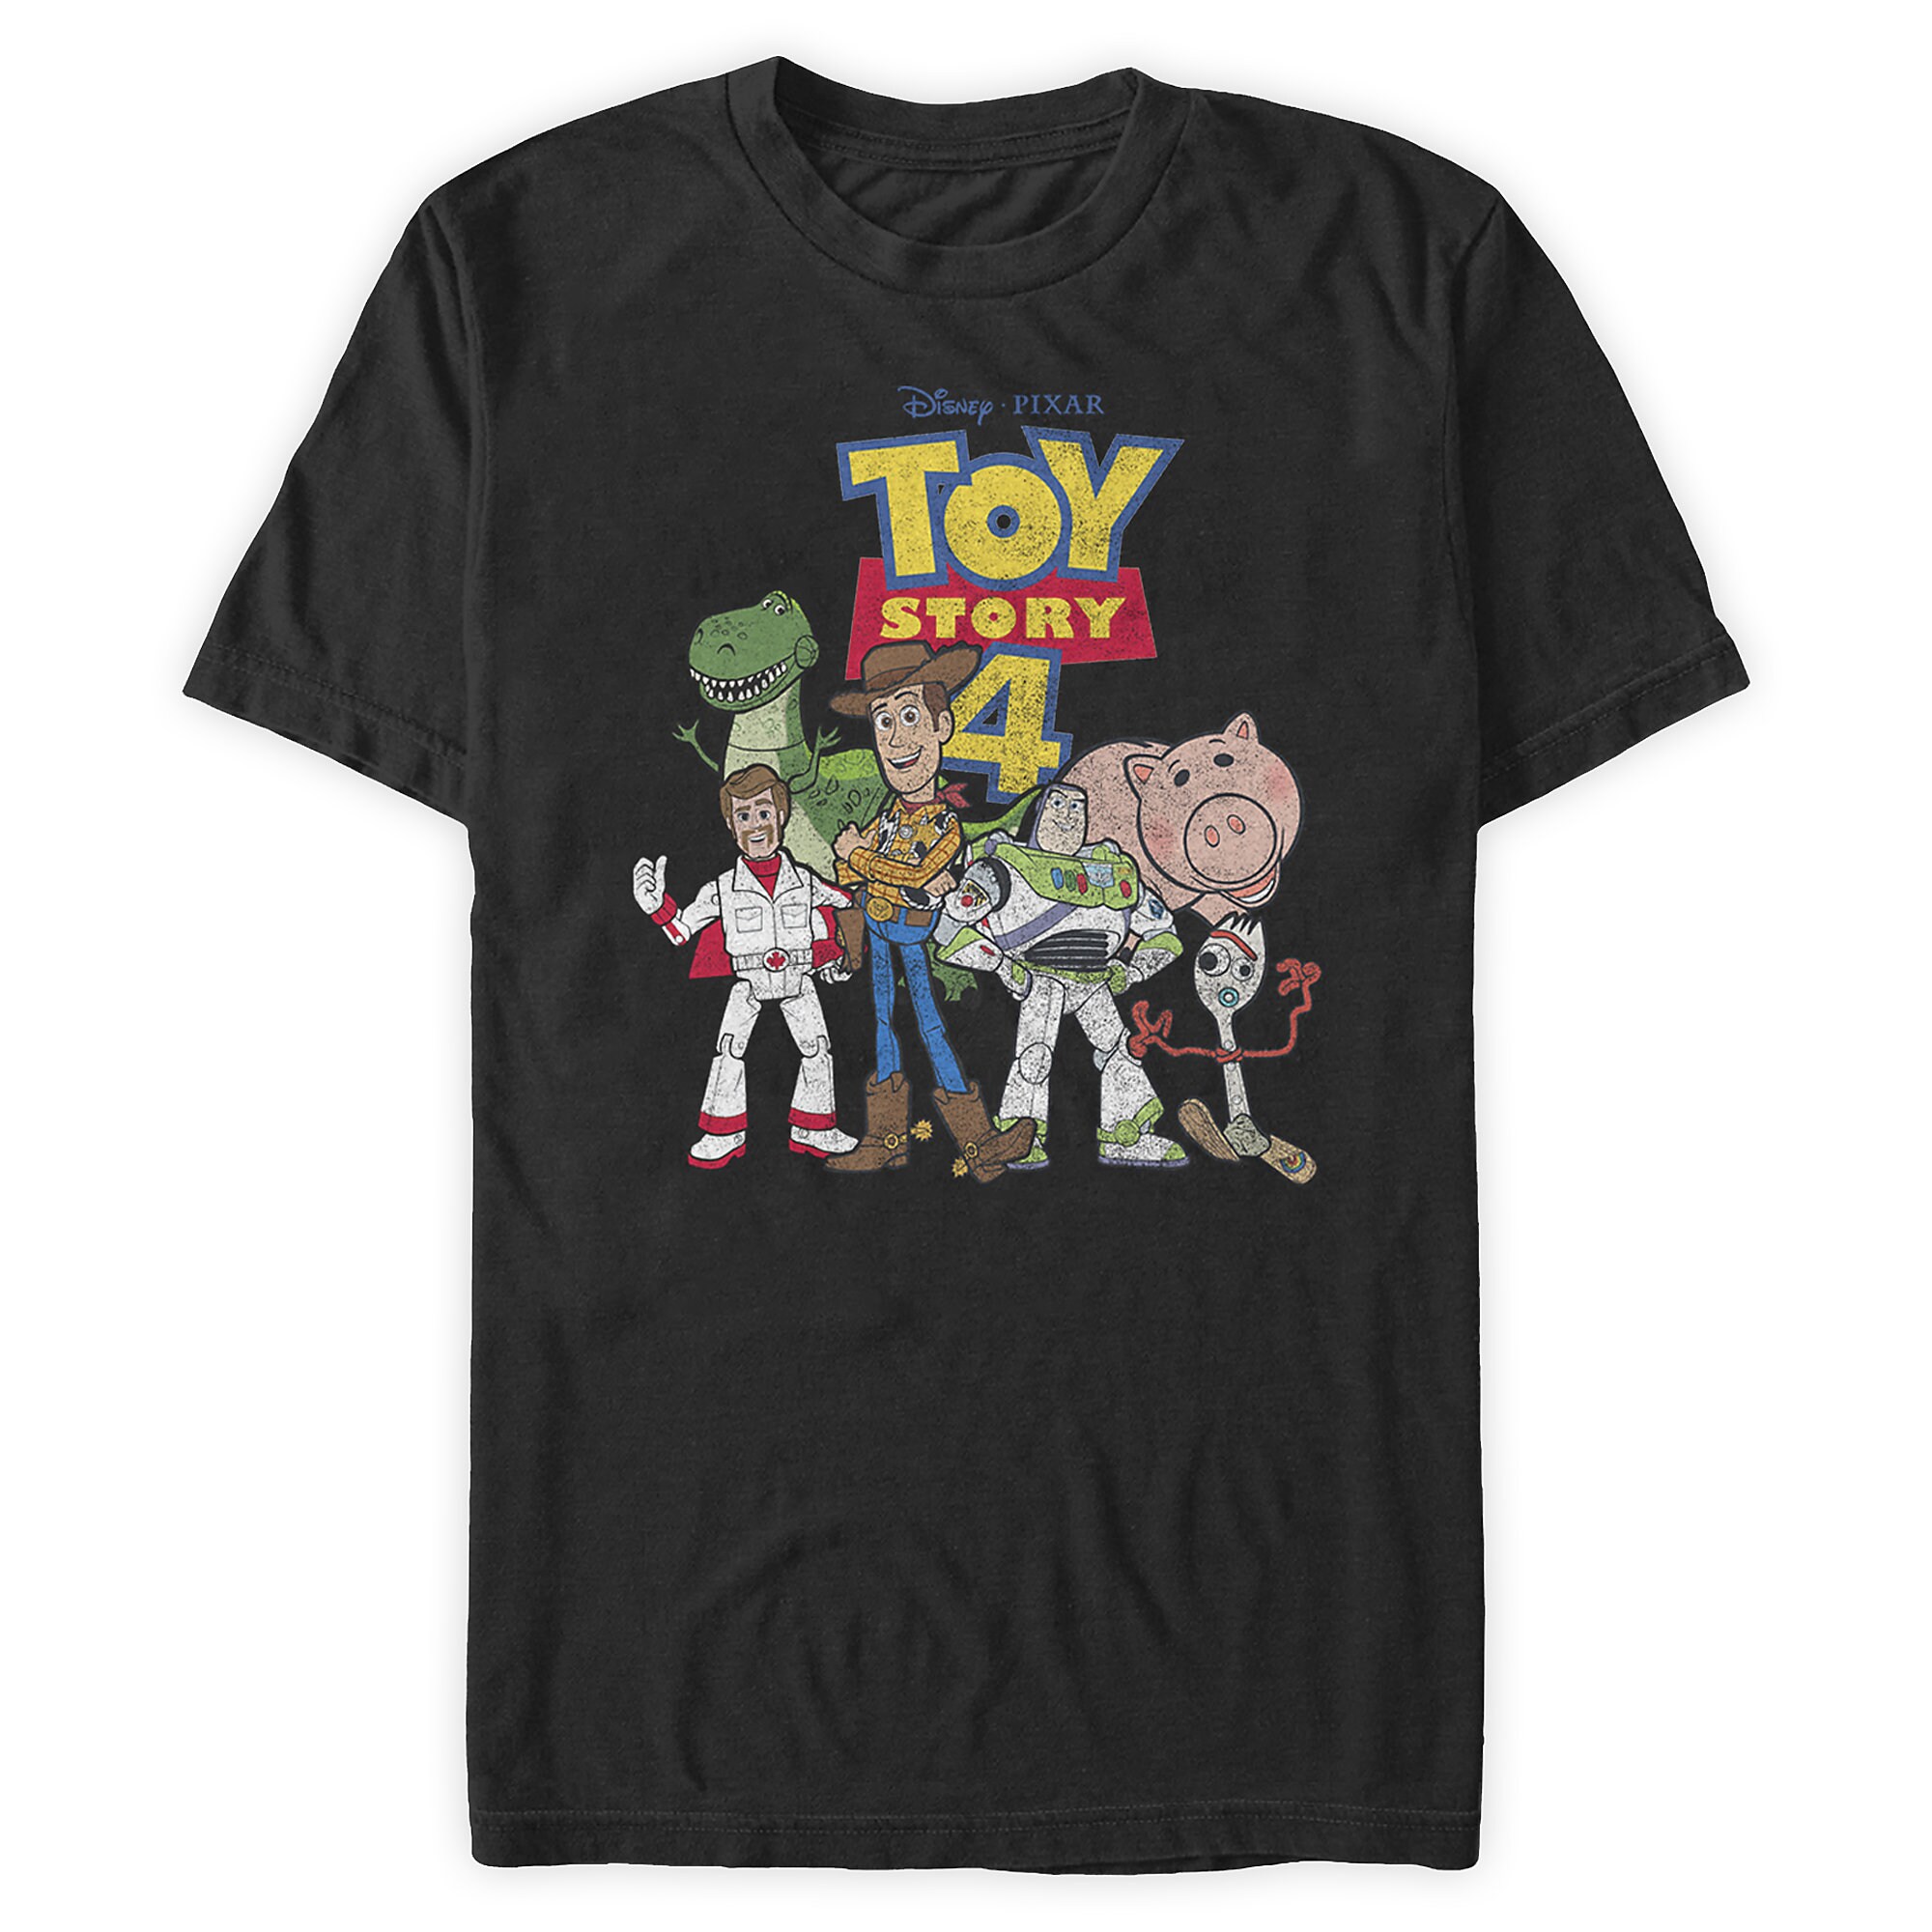 Toy Story 4 T-Shirt for Adults